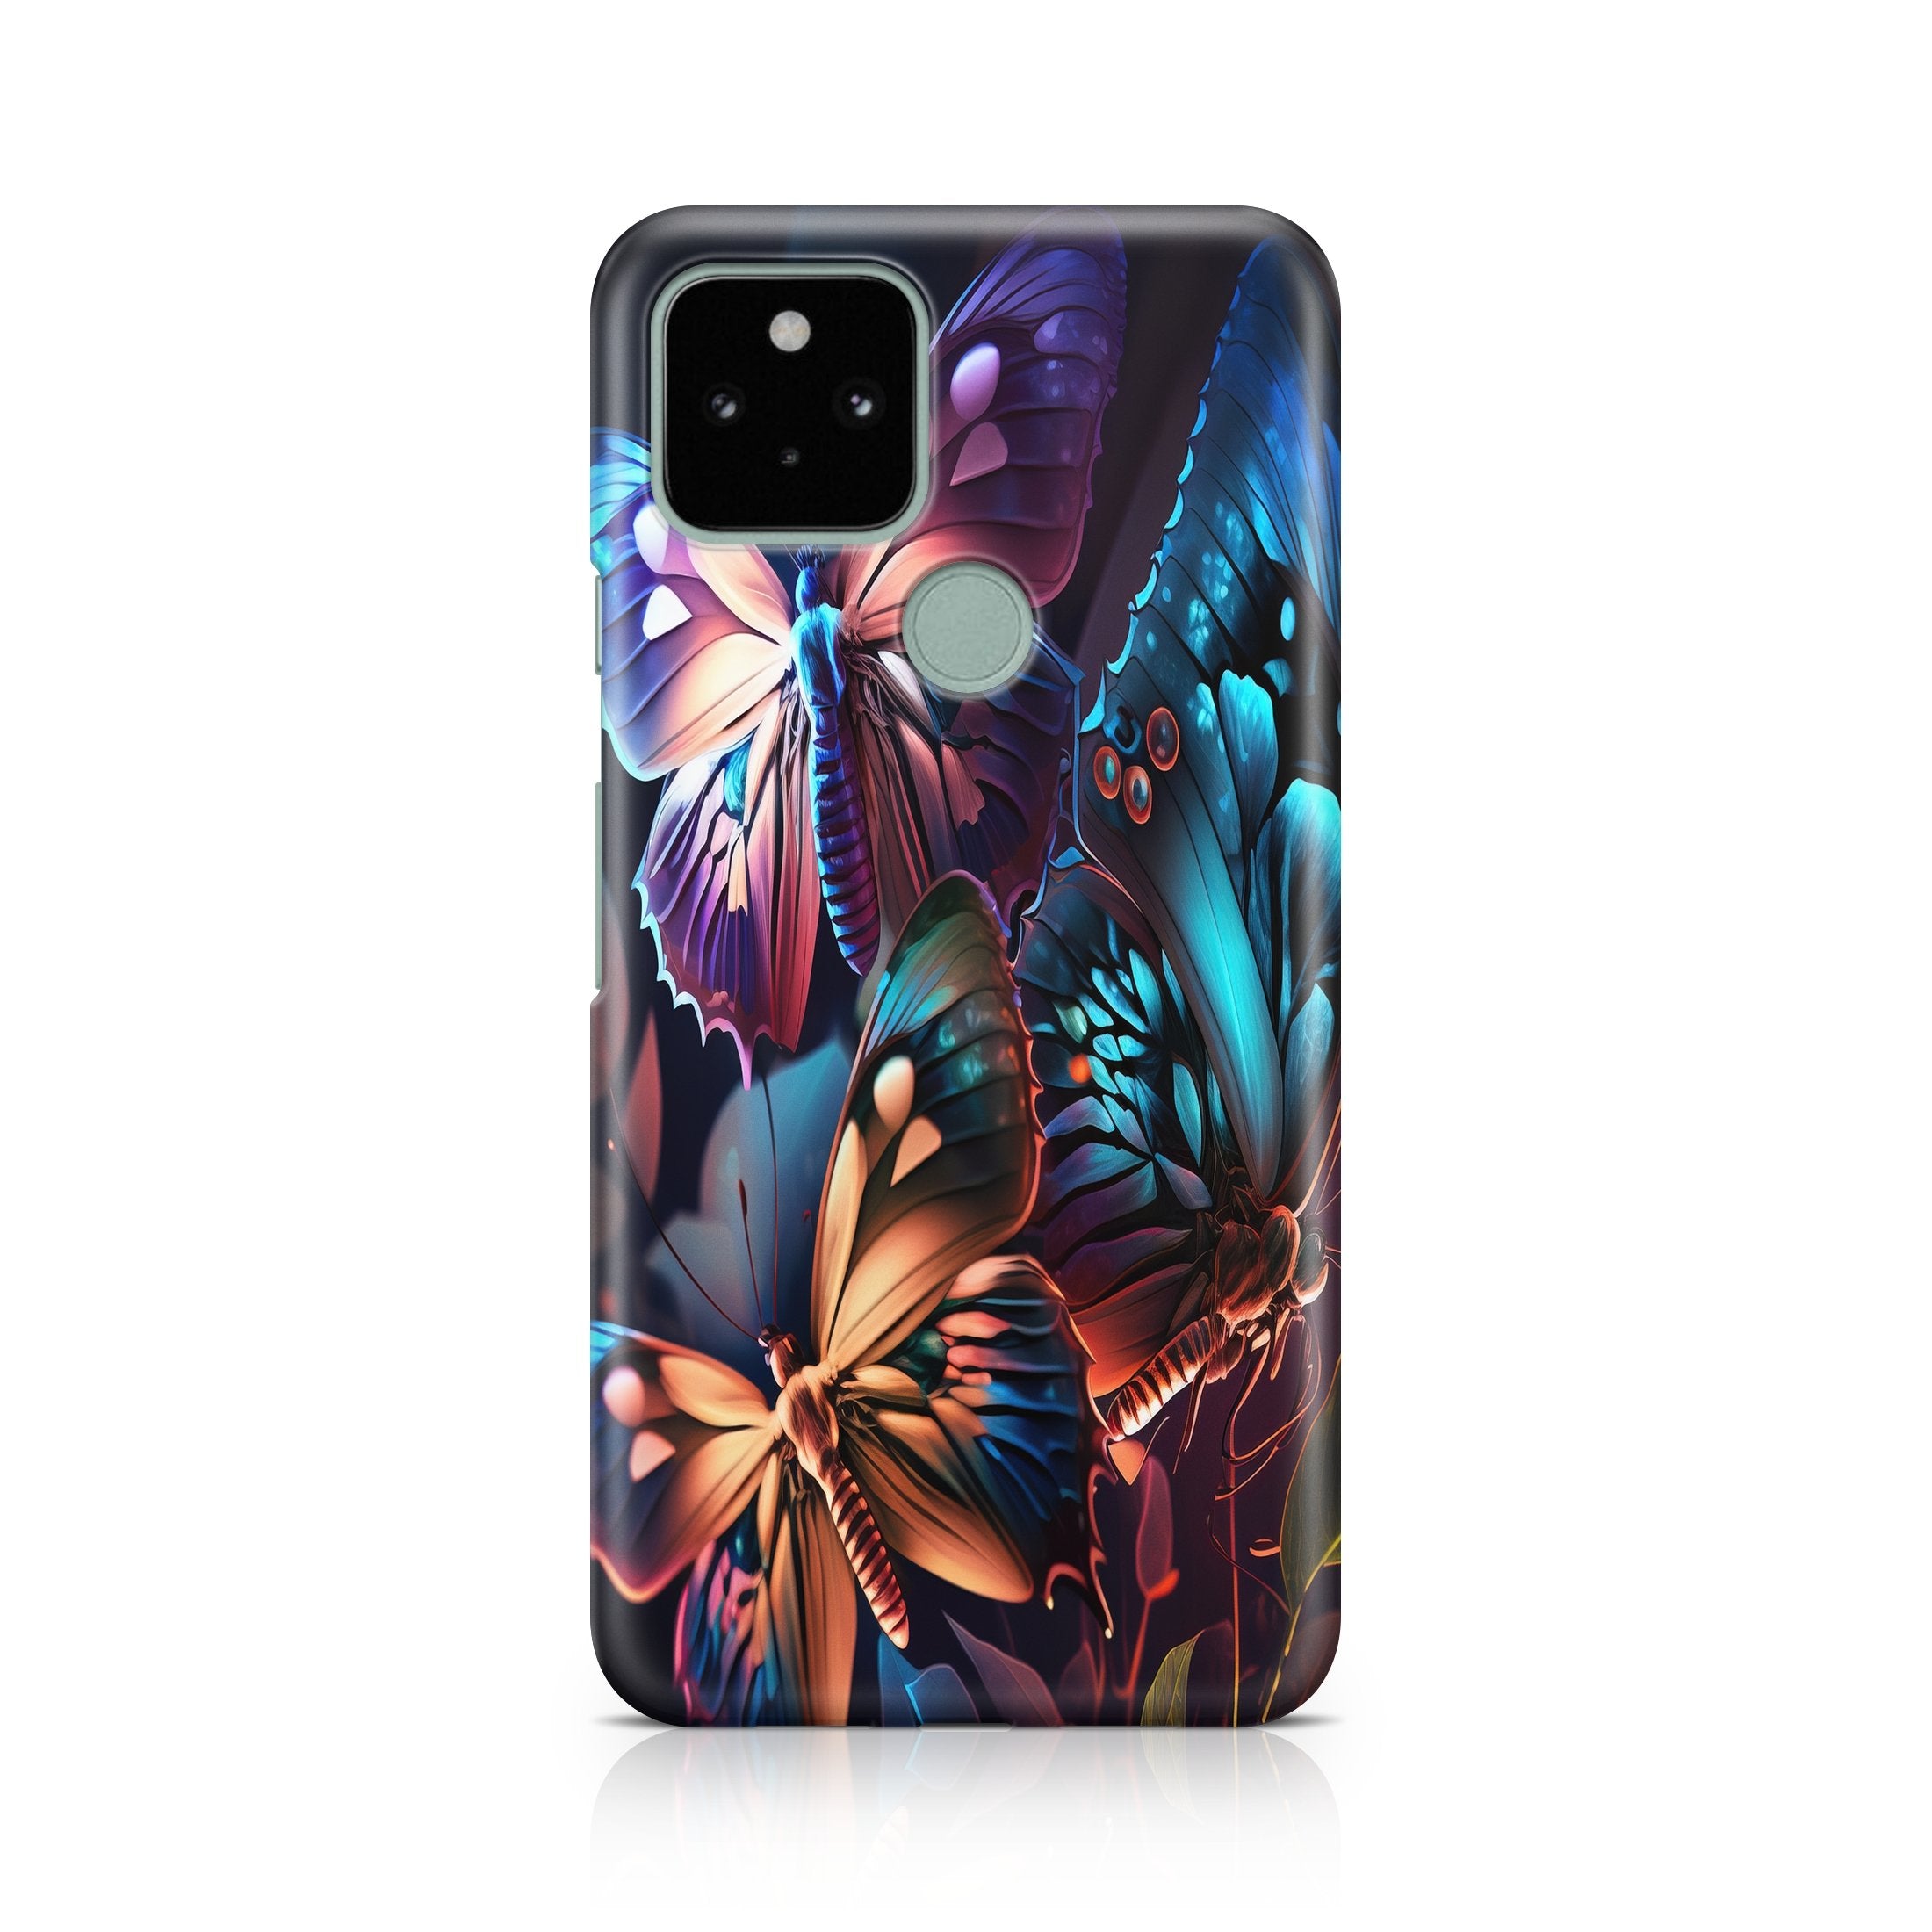 Shadow Butterflies - Google phone case designs by CaseSwagger